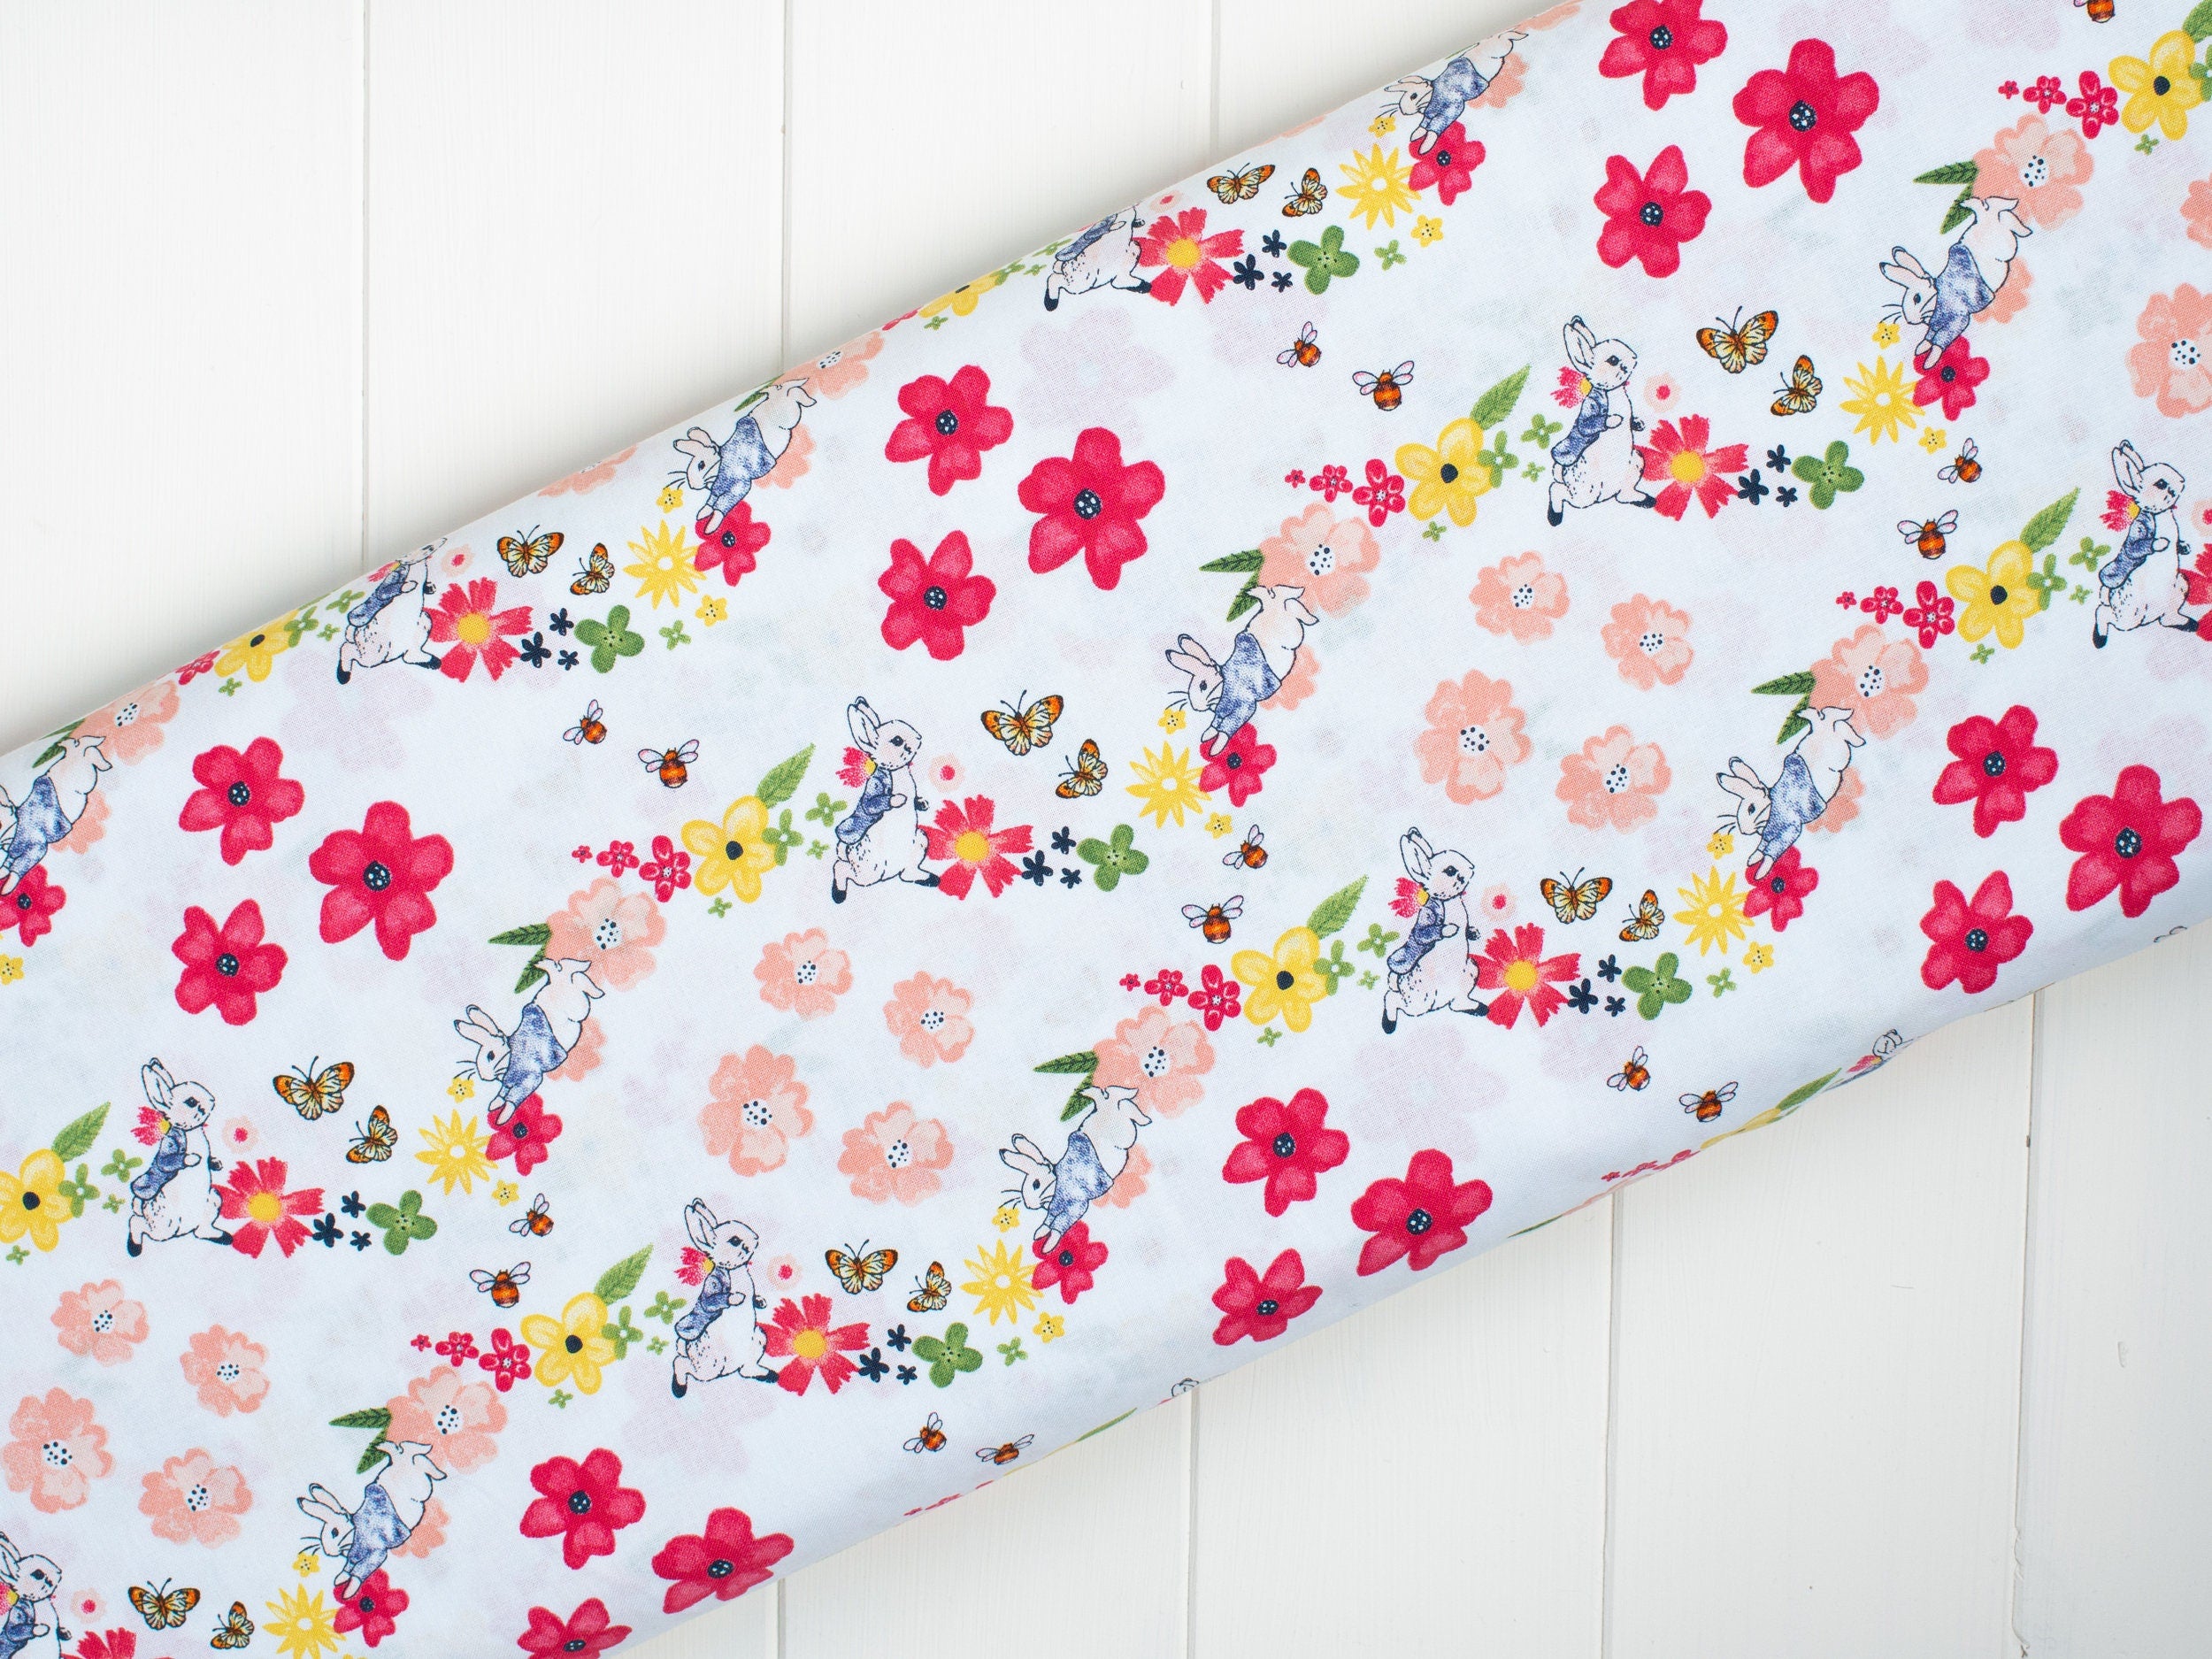 Peter Rabbit spring floral white cotton fabric  - 'Flowers and Dreams' CraftCottonCo